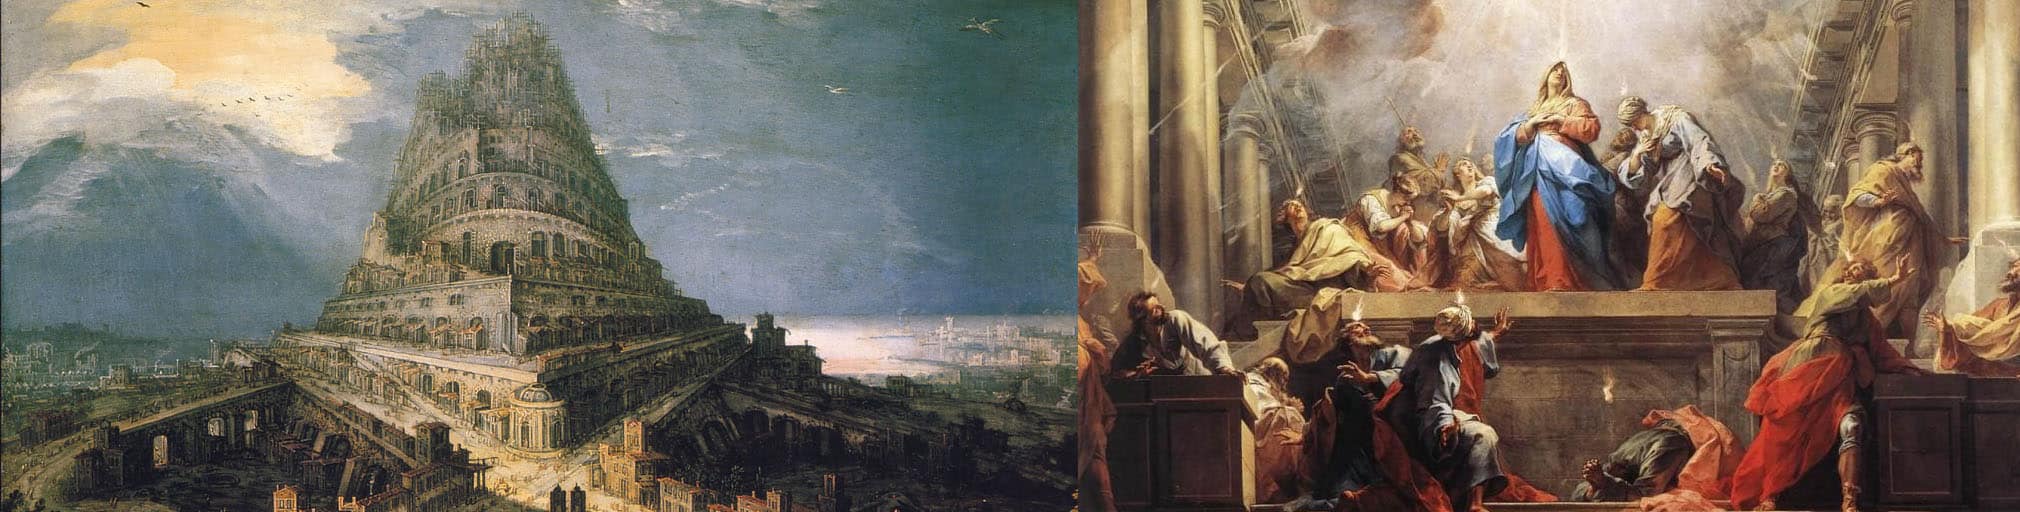 Two colorful paintings are shown, one depicting the Tower of Babel, the other Pentecost.